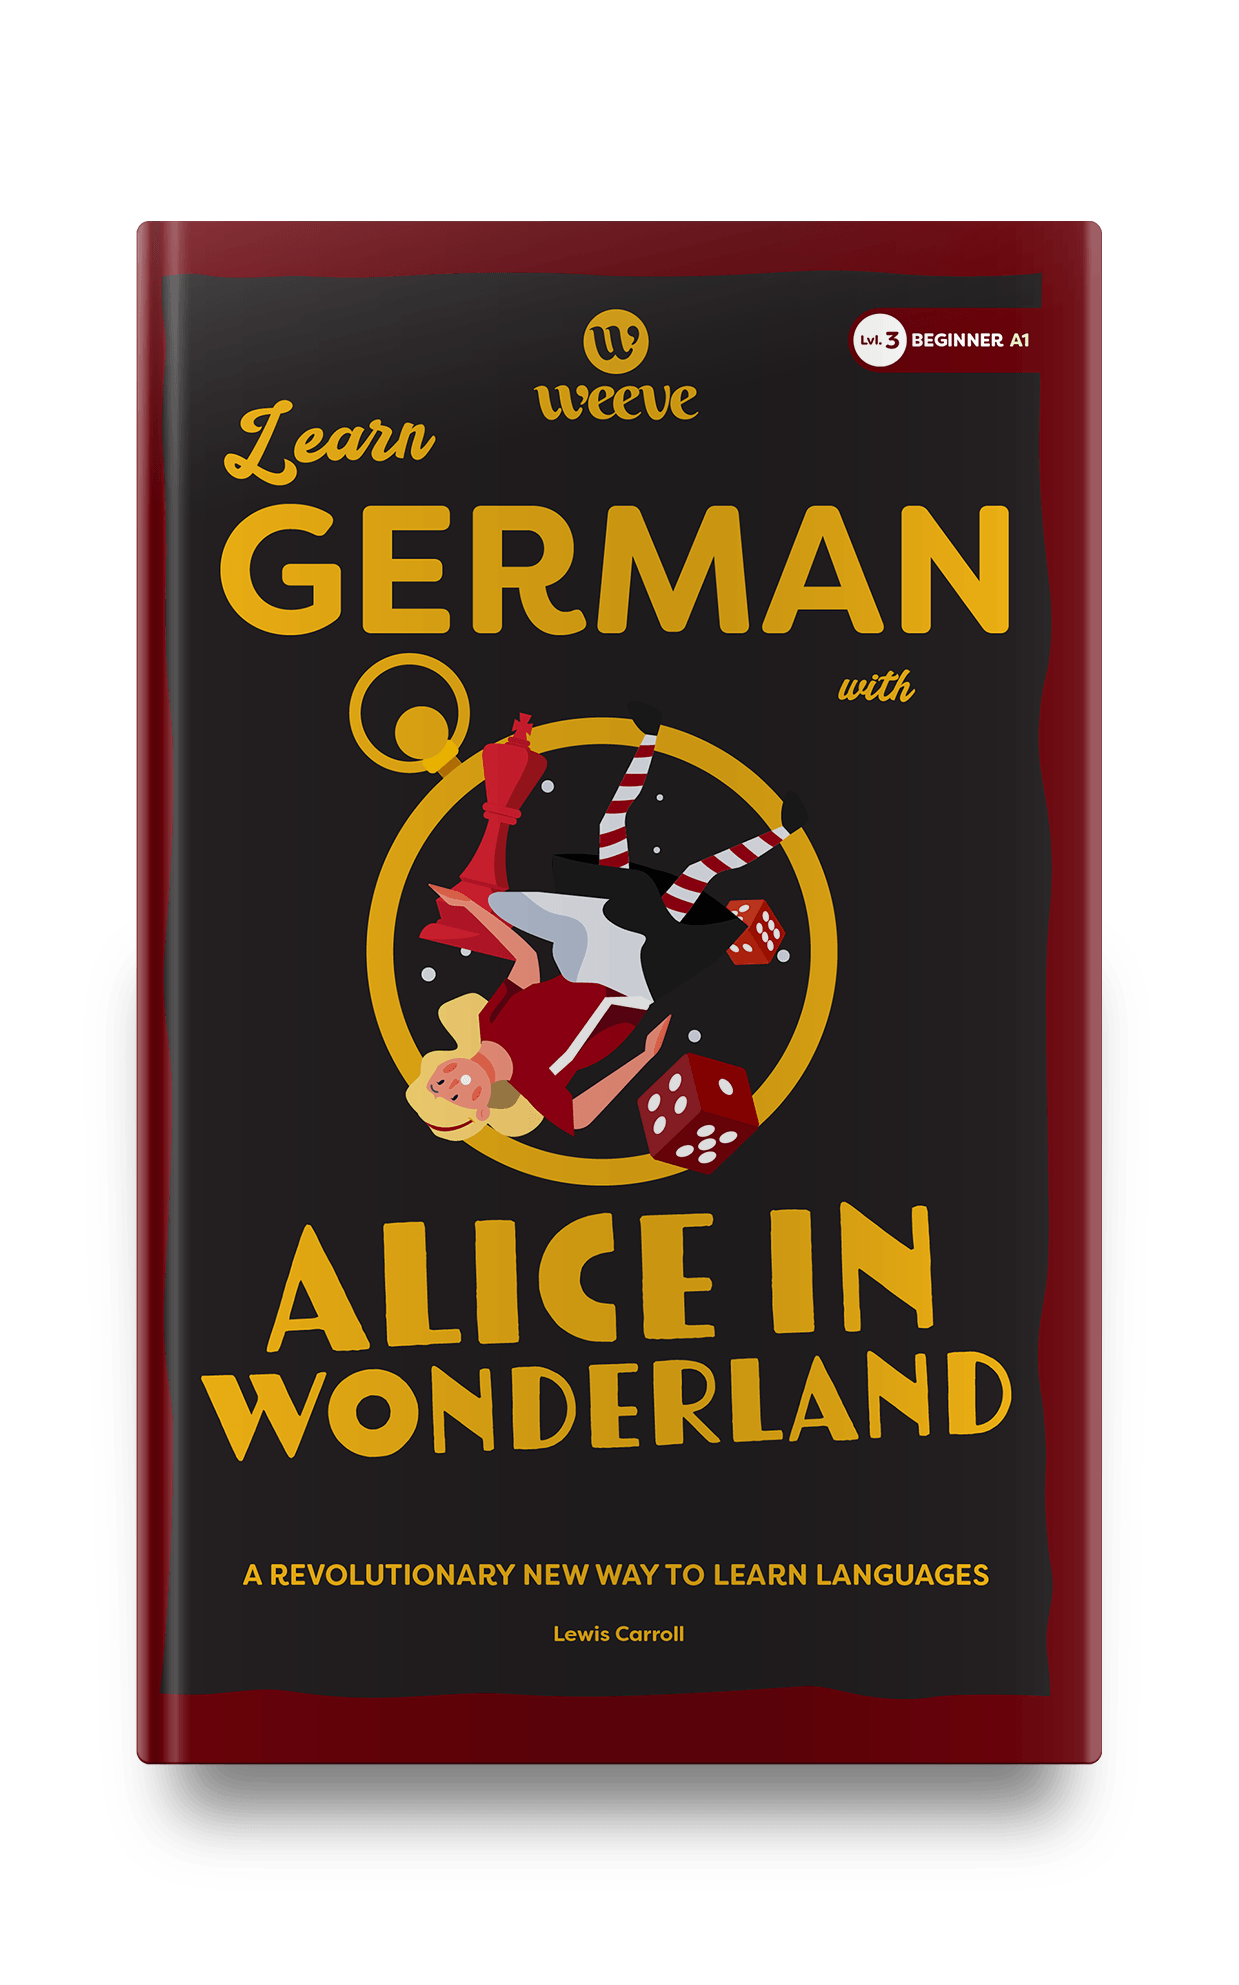 Learn German with Alice in Wonderland - Weeve